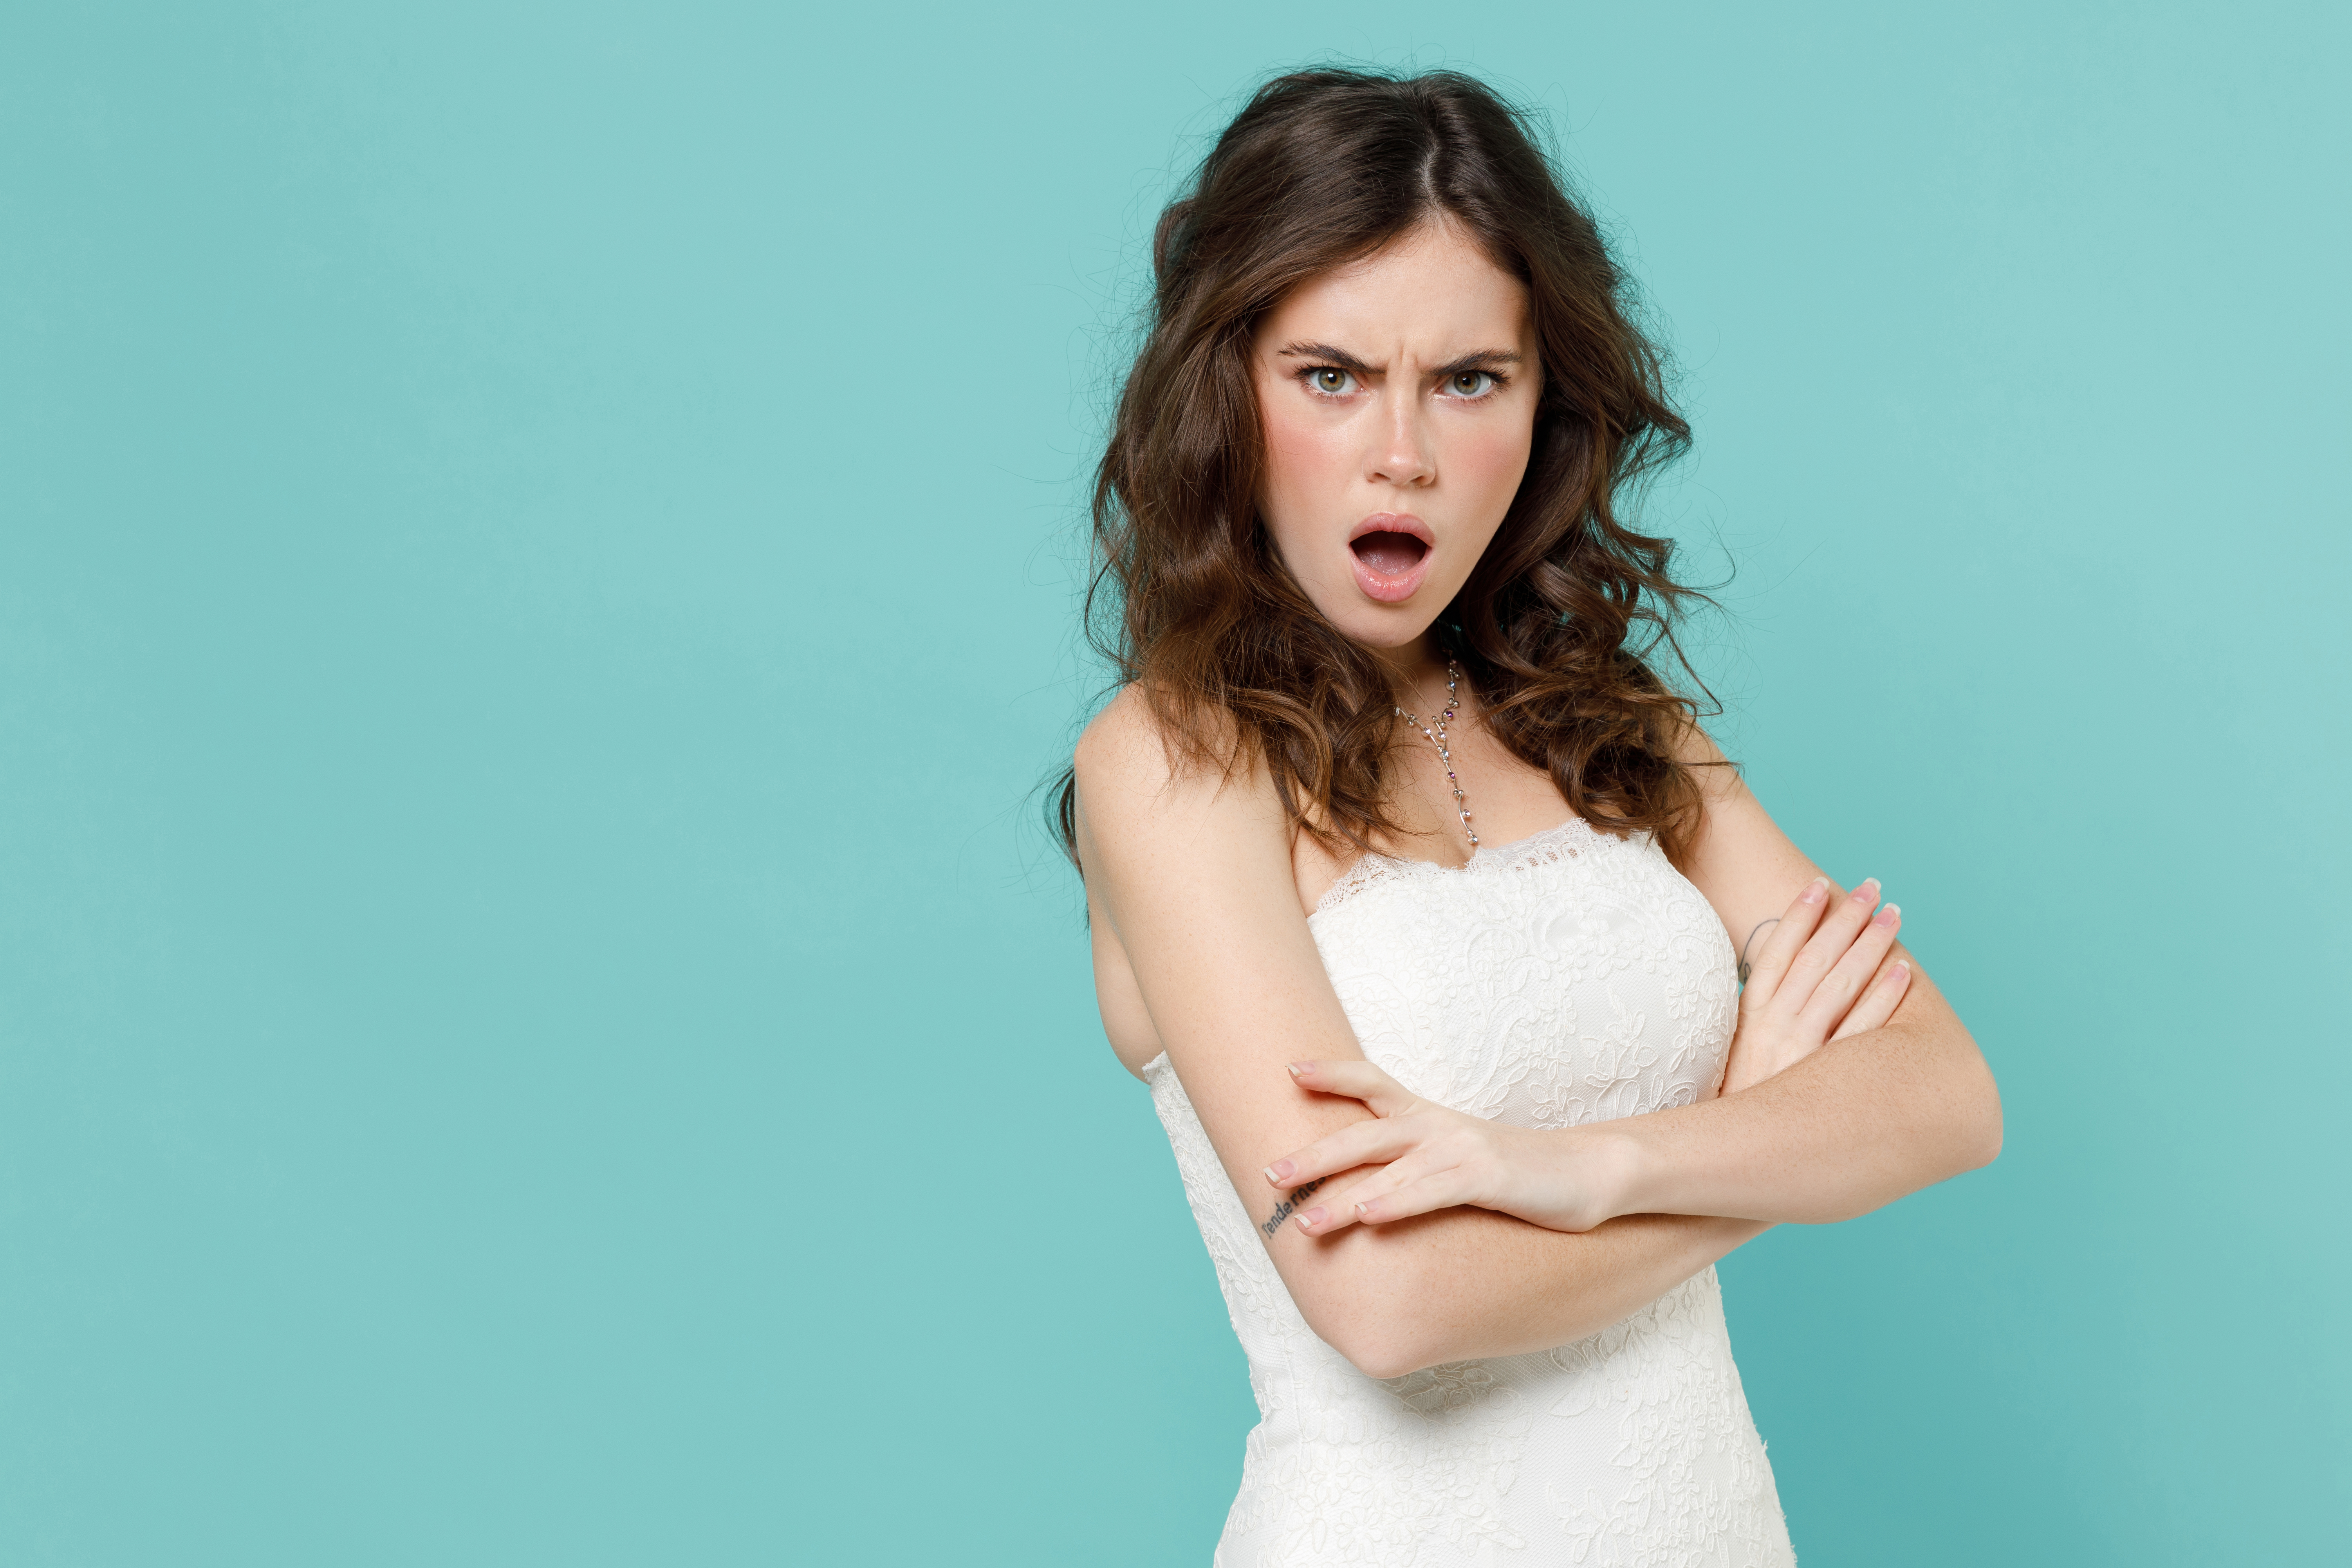 An angry bride standing with her arms folded on her chest | Source: Shutterstock